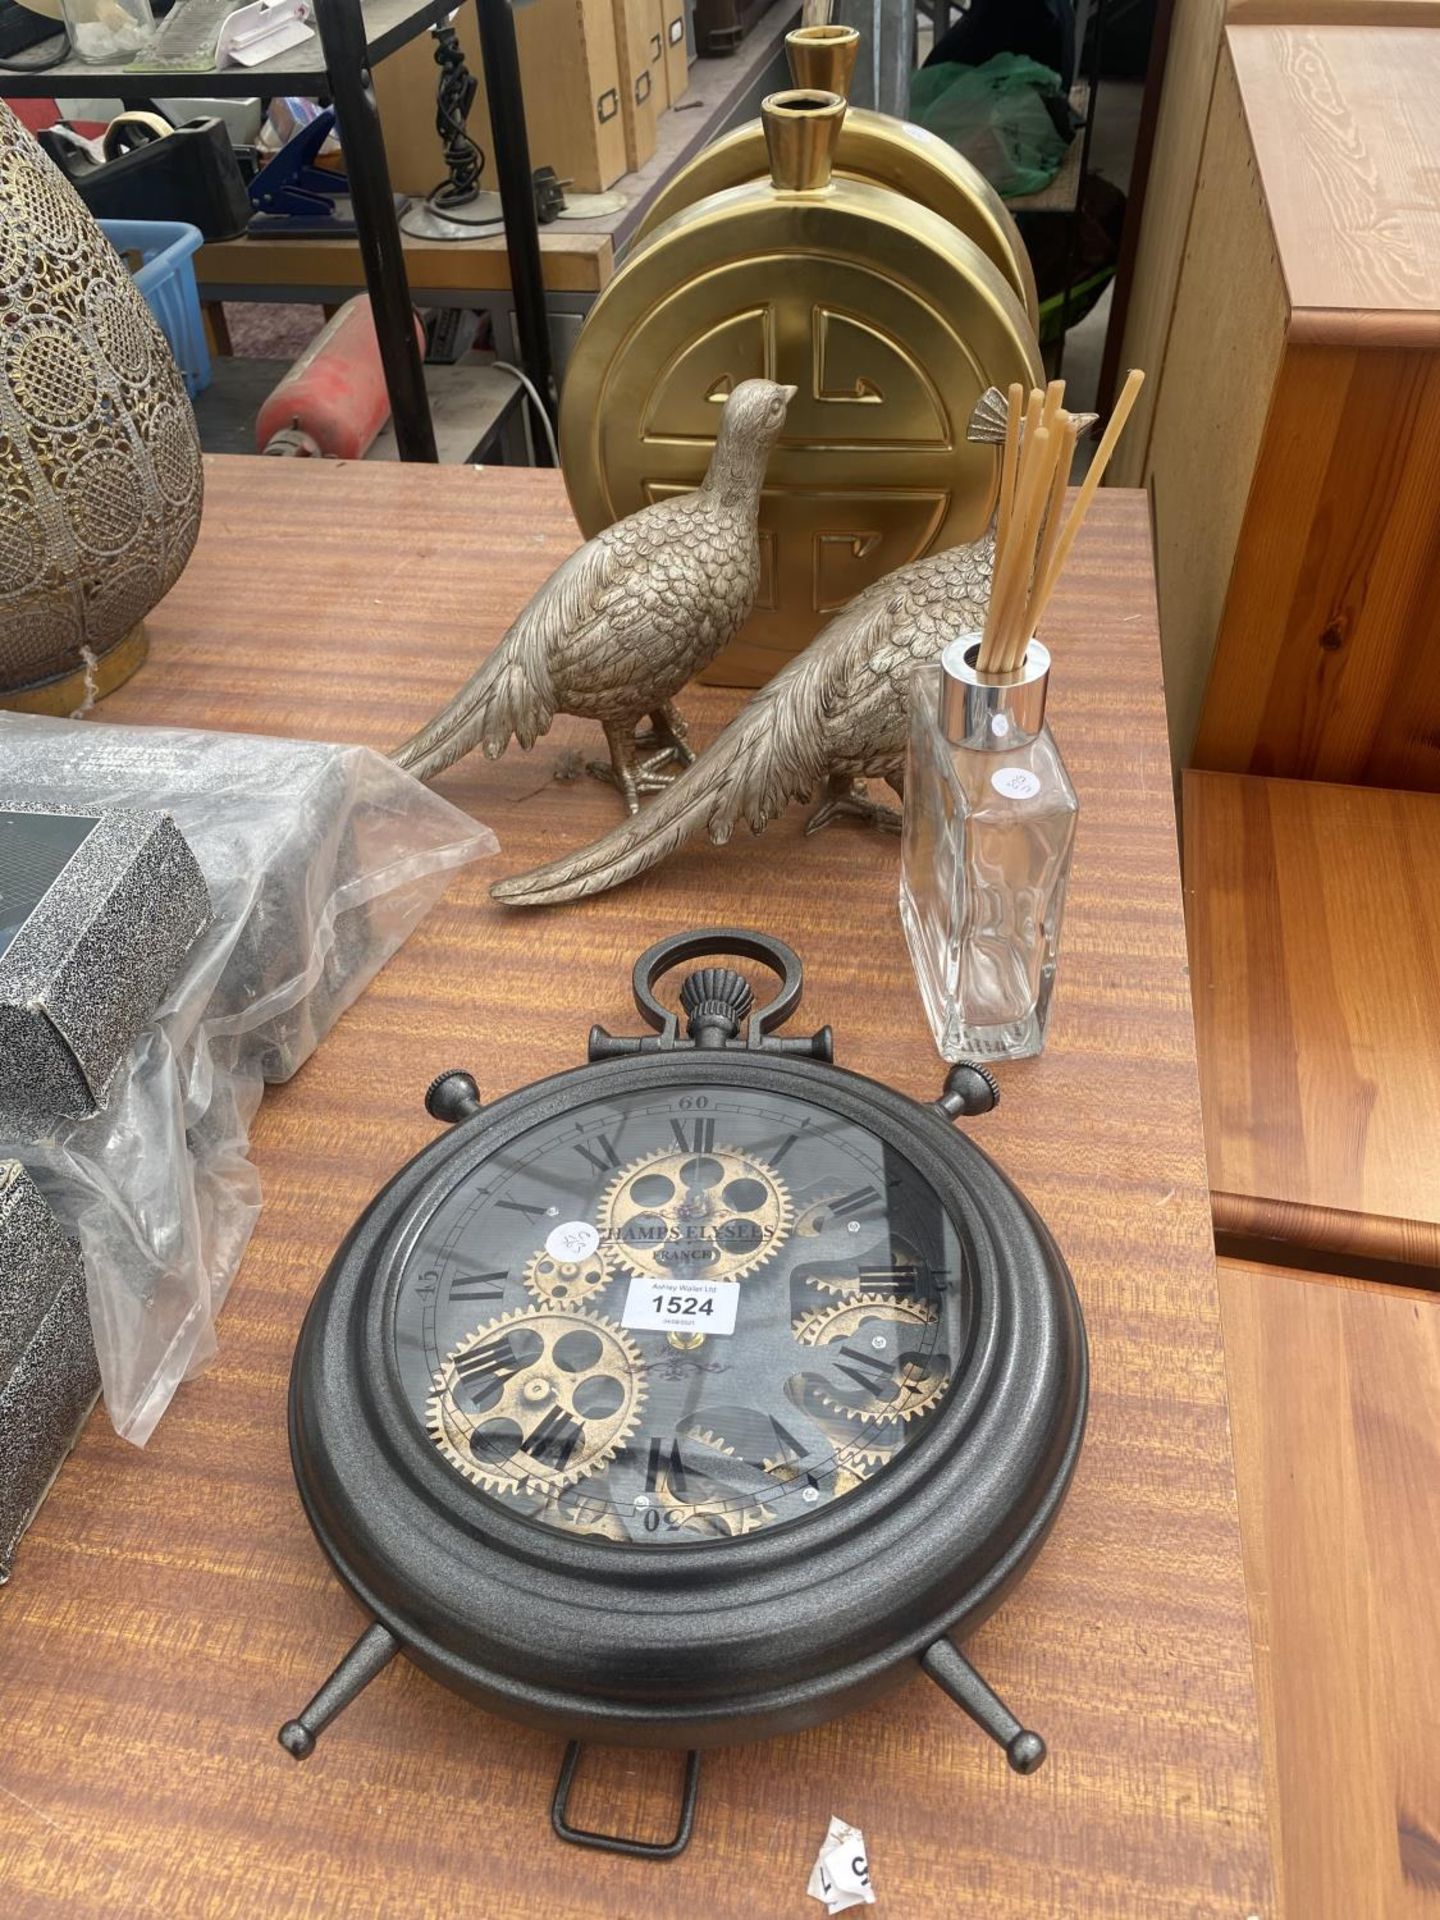 AN ASSORTMENT OF ITEMS TO INCLUDE A CLOCK IN THE FORM OF A POCKET WATCH, VASES AND A PAIR OF